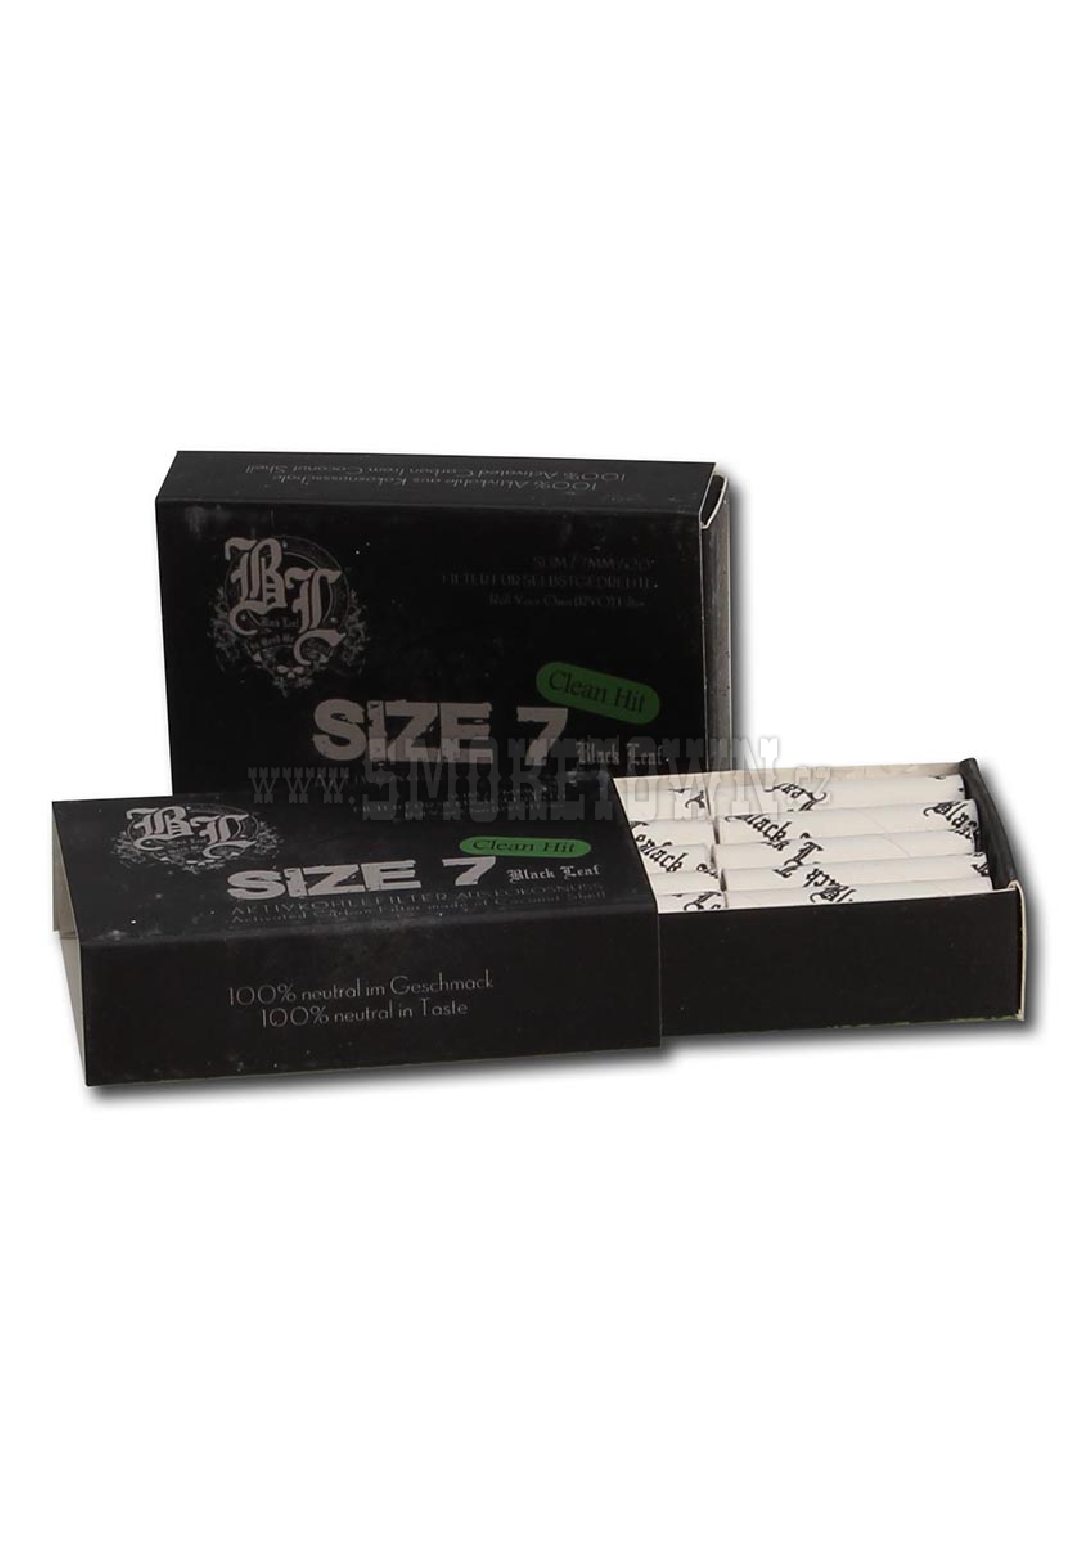 BL SIZE7 Clean Hit Activated Charcoal Filters S 20KS